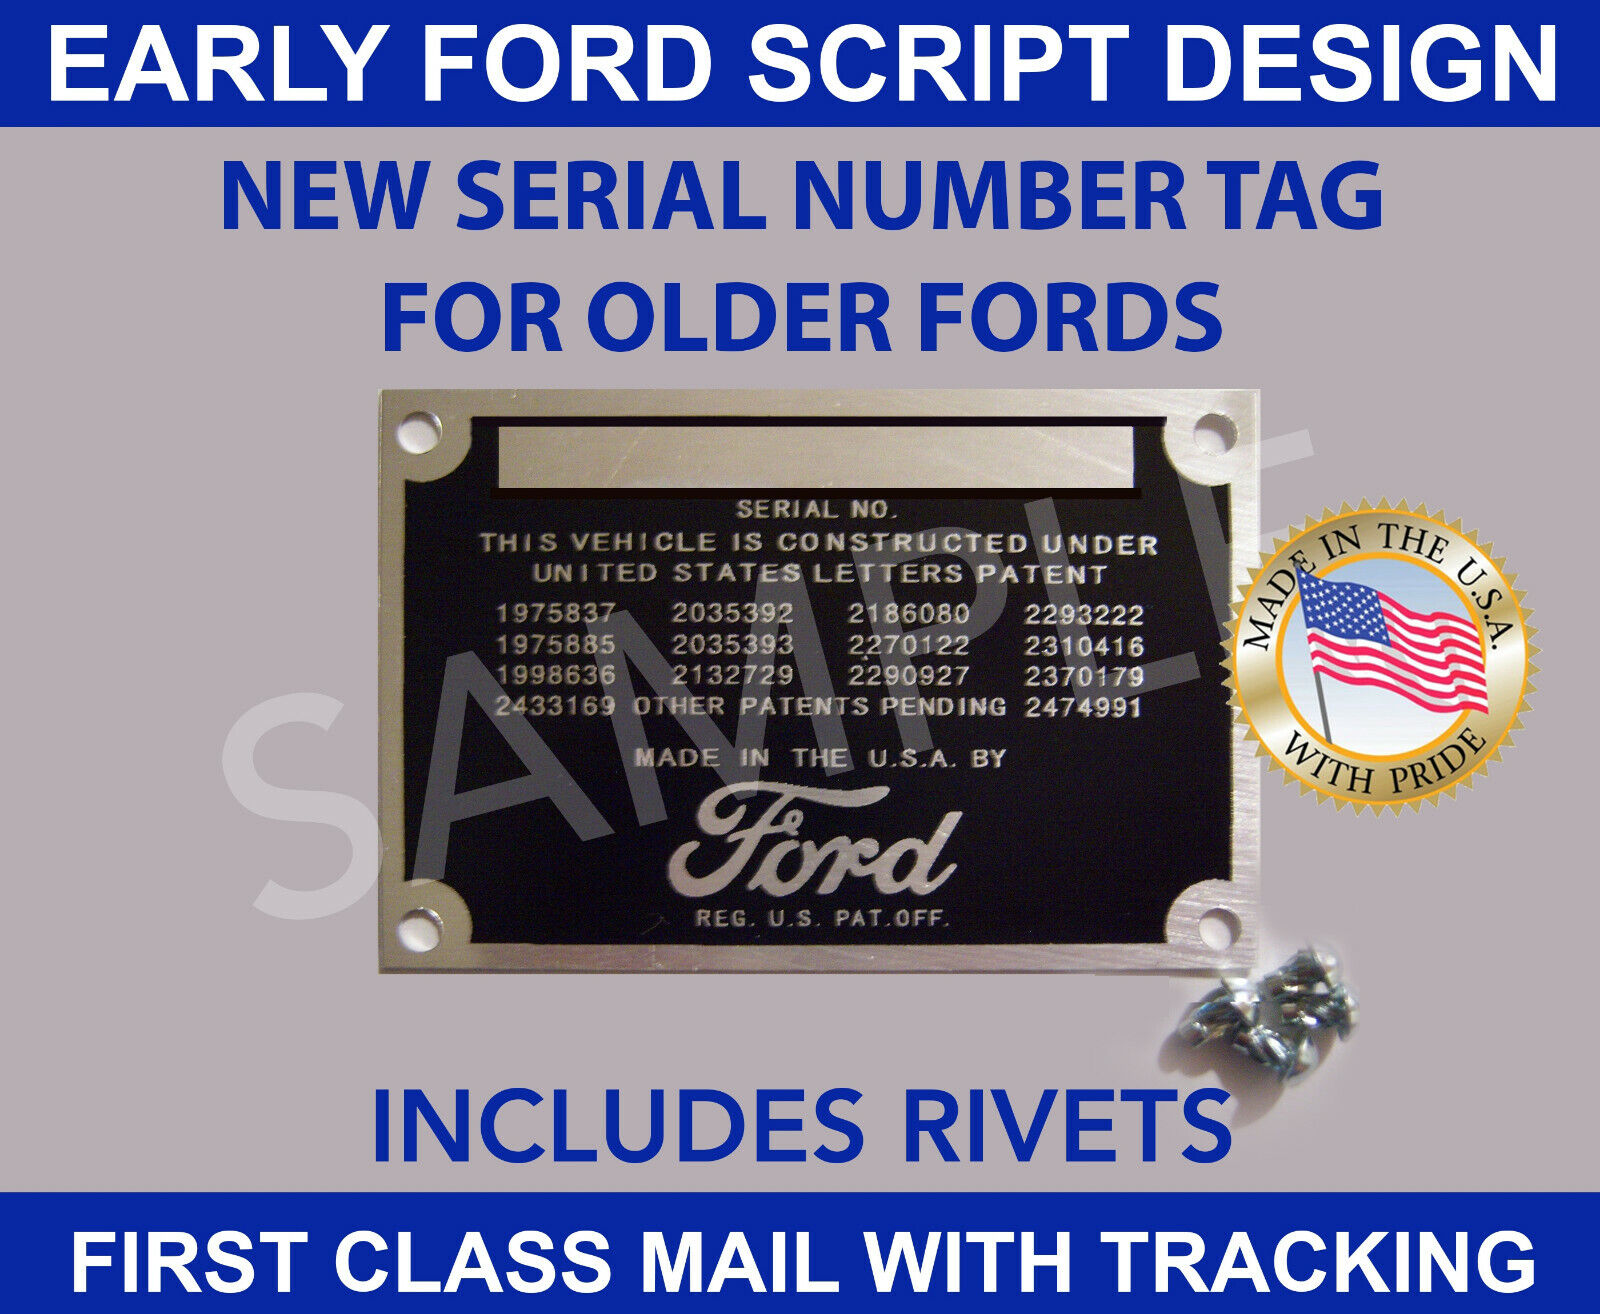 SERIAL NUMBER TAG ID DATA PLATE VINTAGE SCRIPT DESIGN W/RIVETS MADE IN USA